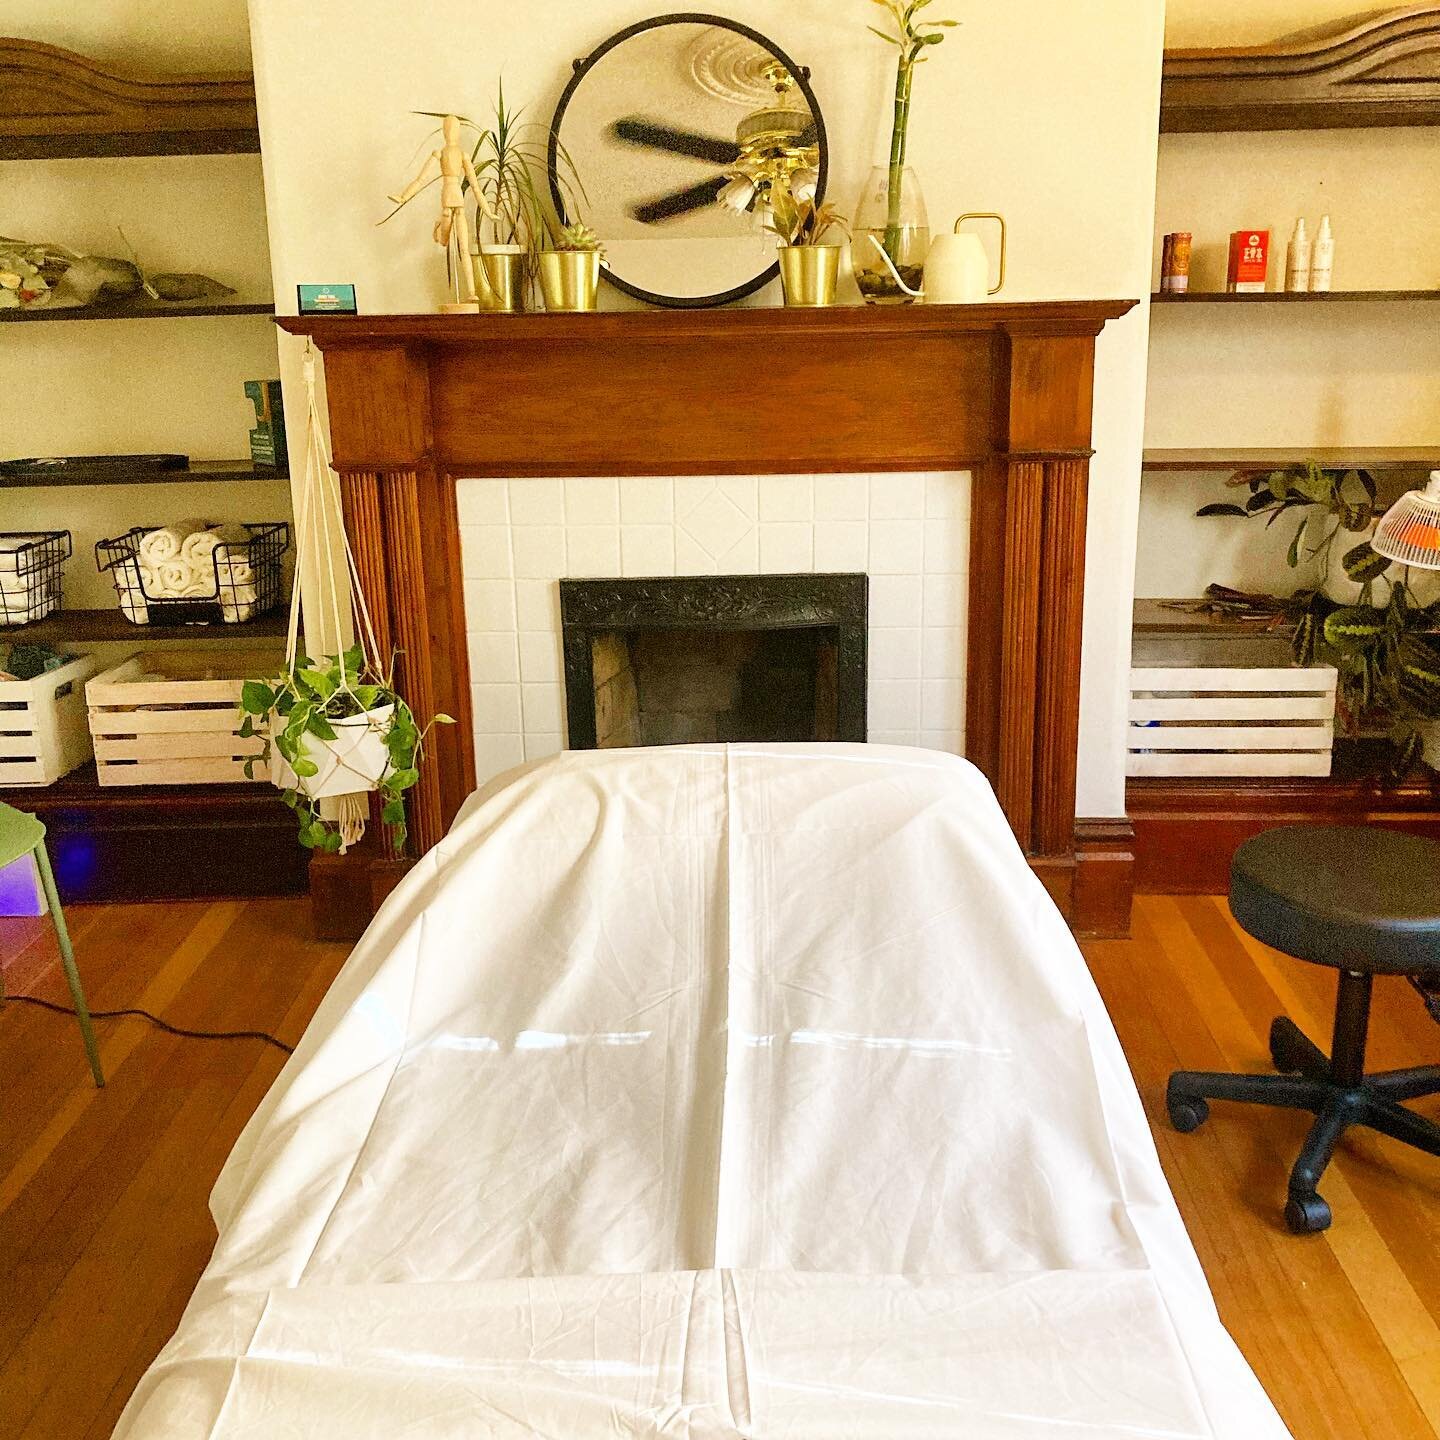 ✨💕🙉🌿💕✨

Prepare for unapologetic room photo spam.

#acupuncture #chronicpain #victoriabc #yyj #tcm #cupping #moxa #massage #painrelief #calm #stress #relax #peace #mind #body #soul #holistic #heal #recovery #rehab #cookstvillage #downtownyyj